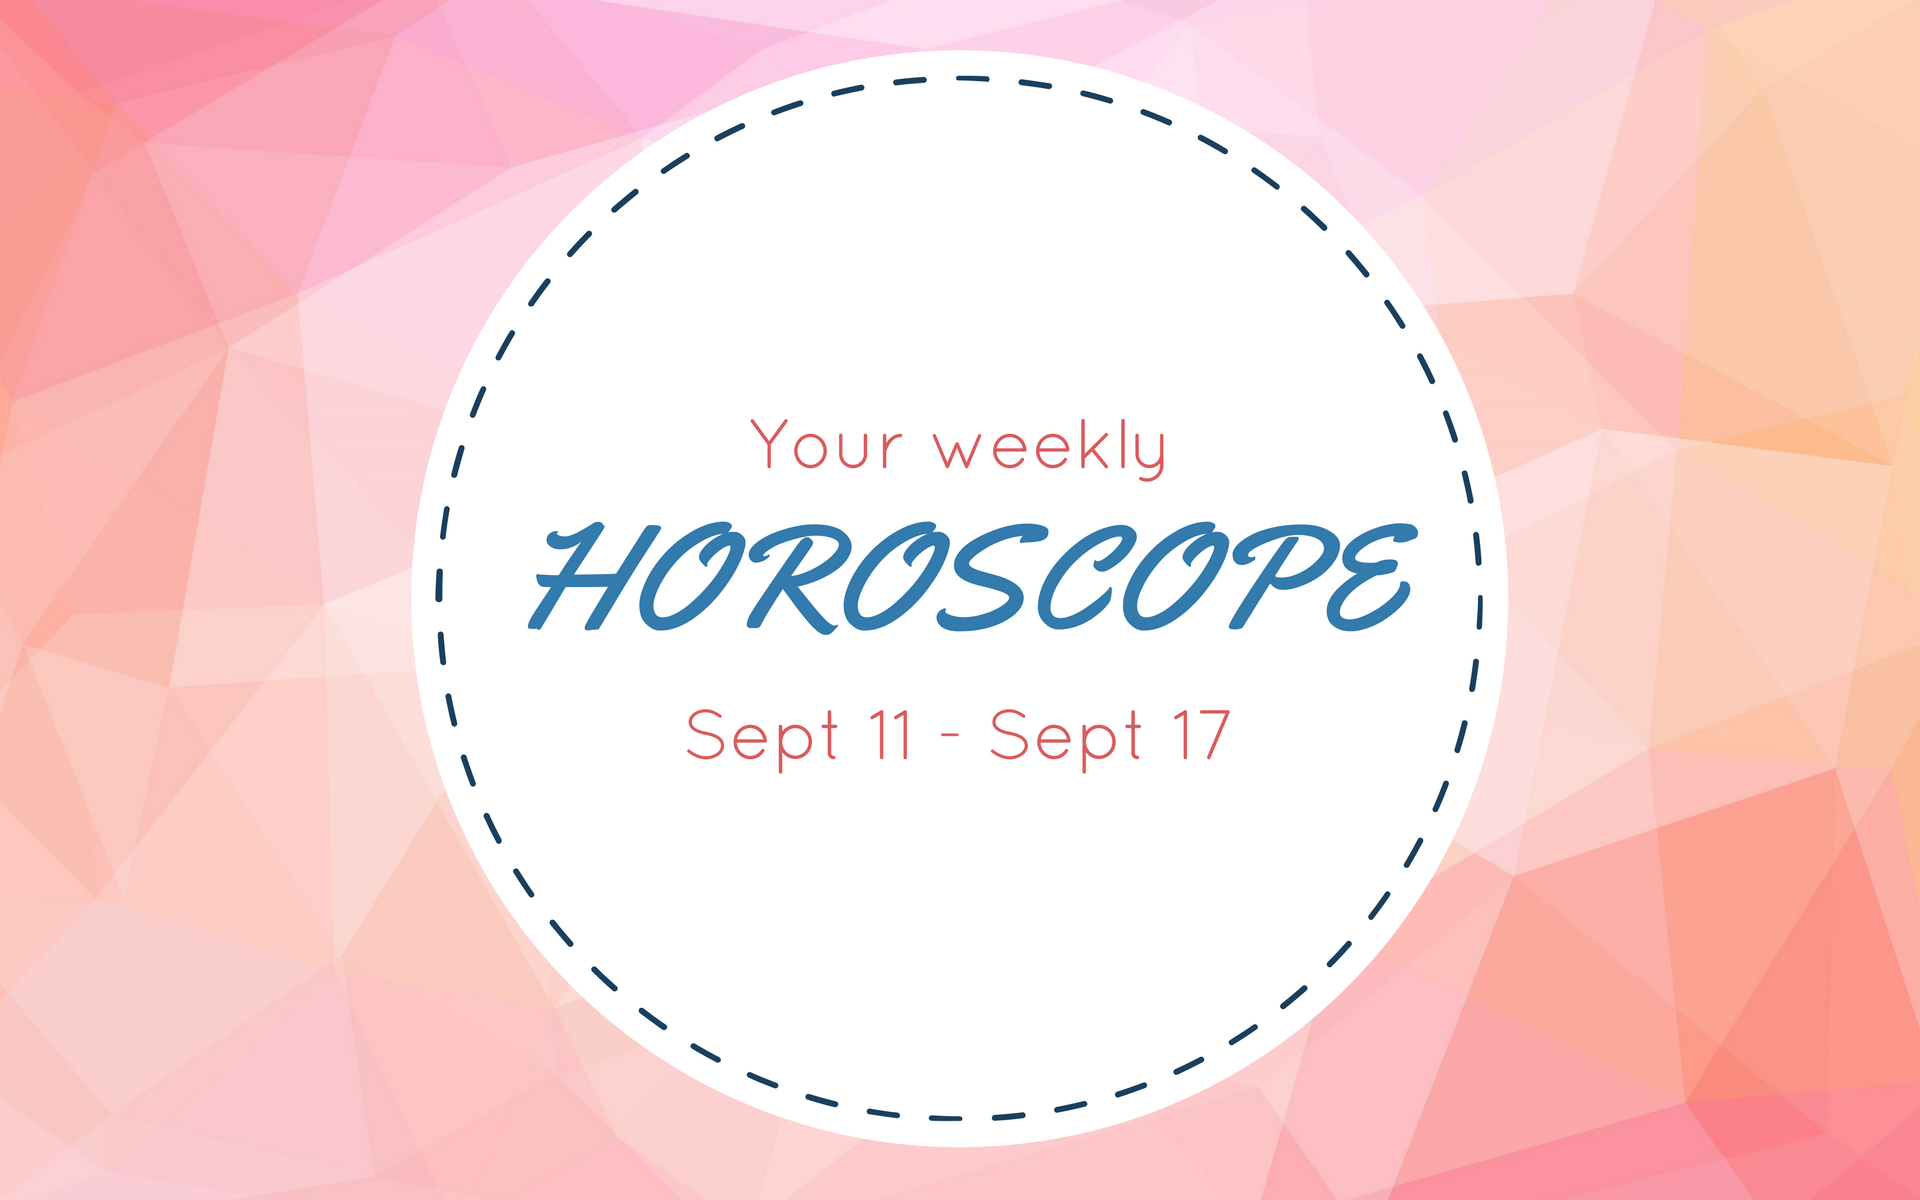 Your Weekly Horoscope: Sept 11 - Sept 17